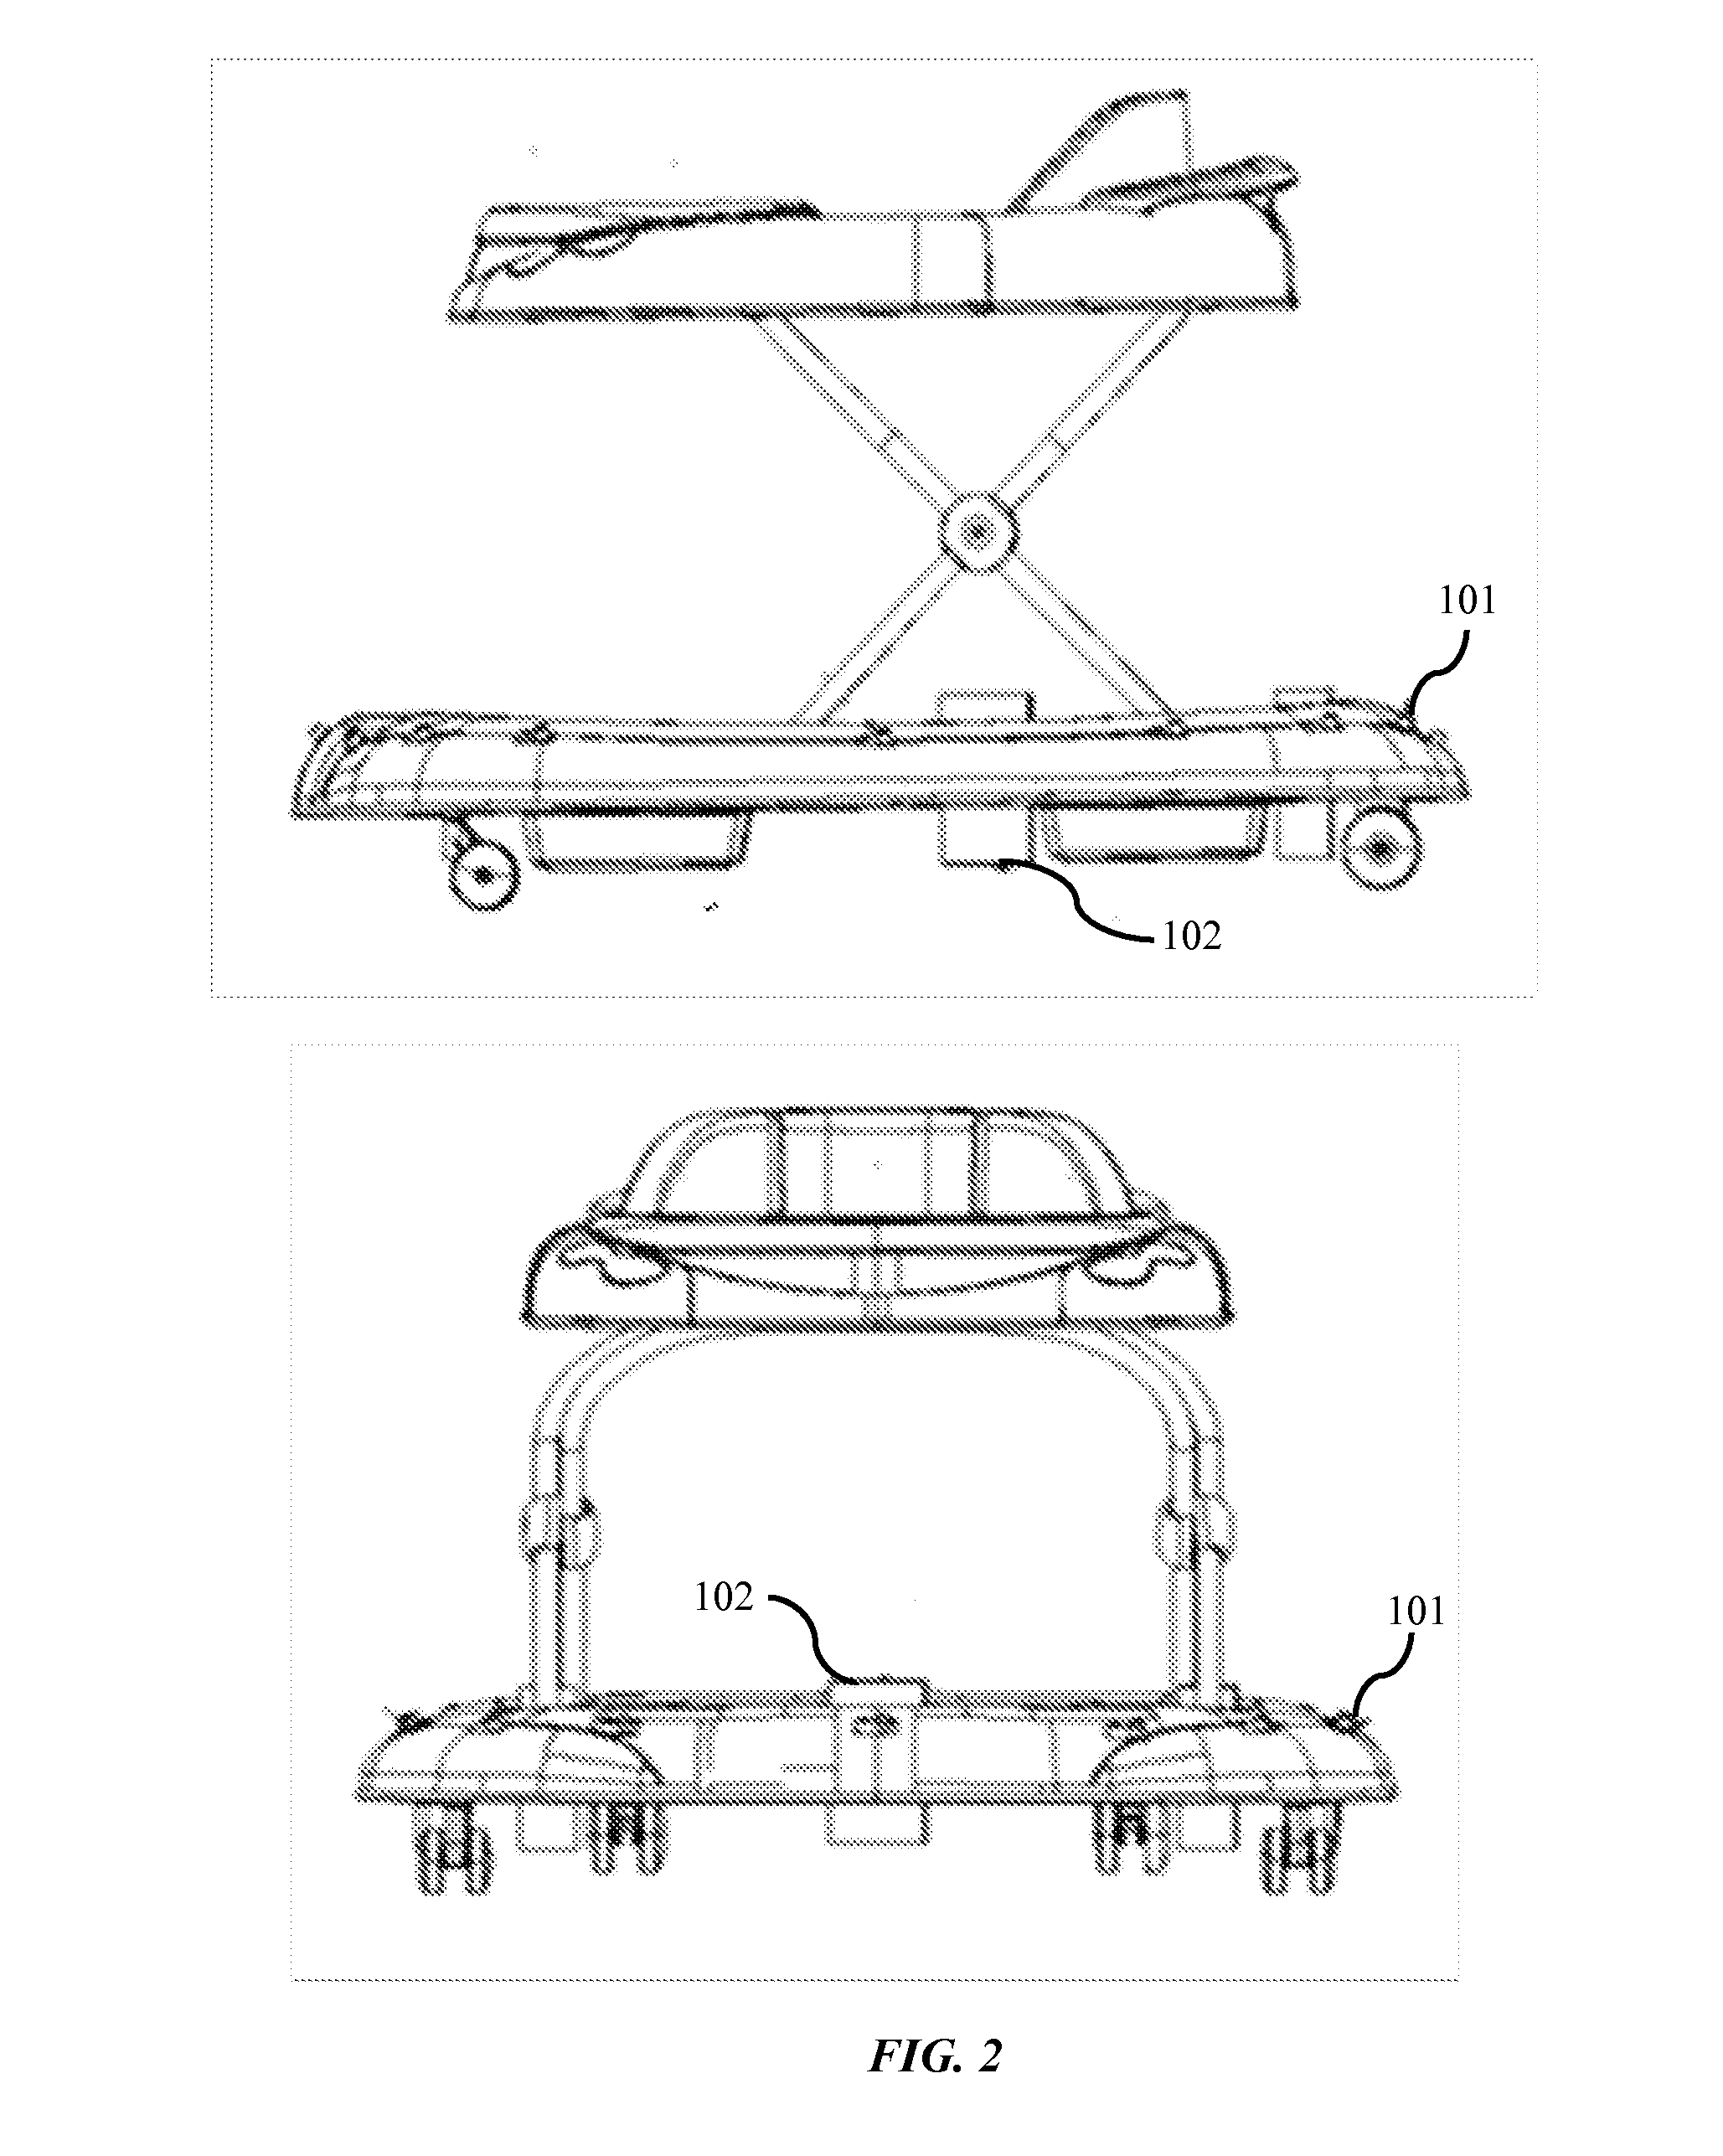 Baby walker system with a braking mechanism for movement control